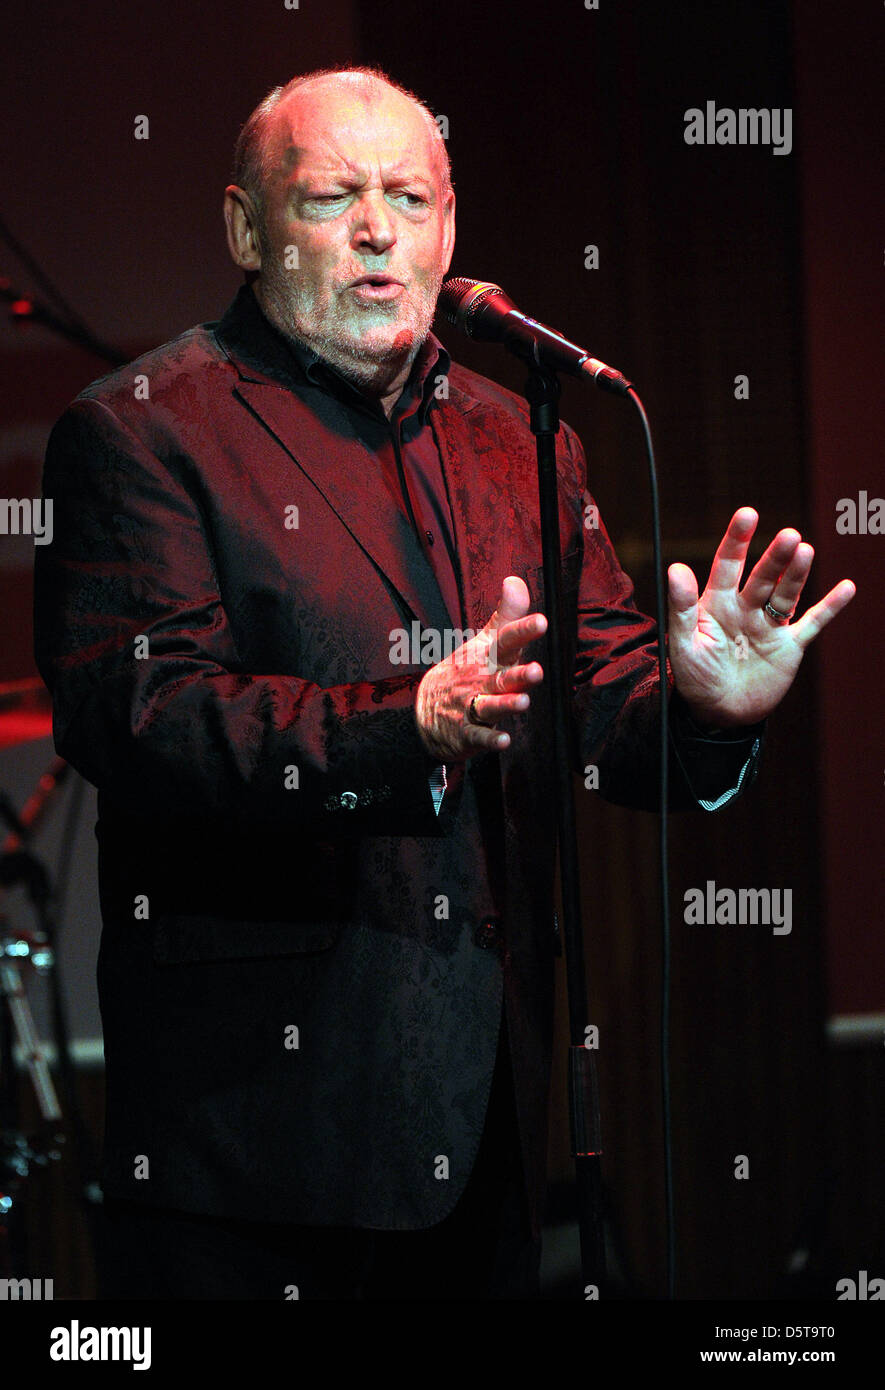 British singer Joe Cocker performs during a concert for the German public broadcaster WDR2 in Cologne, Germany, 18 November 2012. Photo: Henning Kaiser Stock Photo